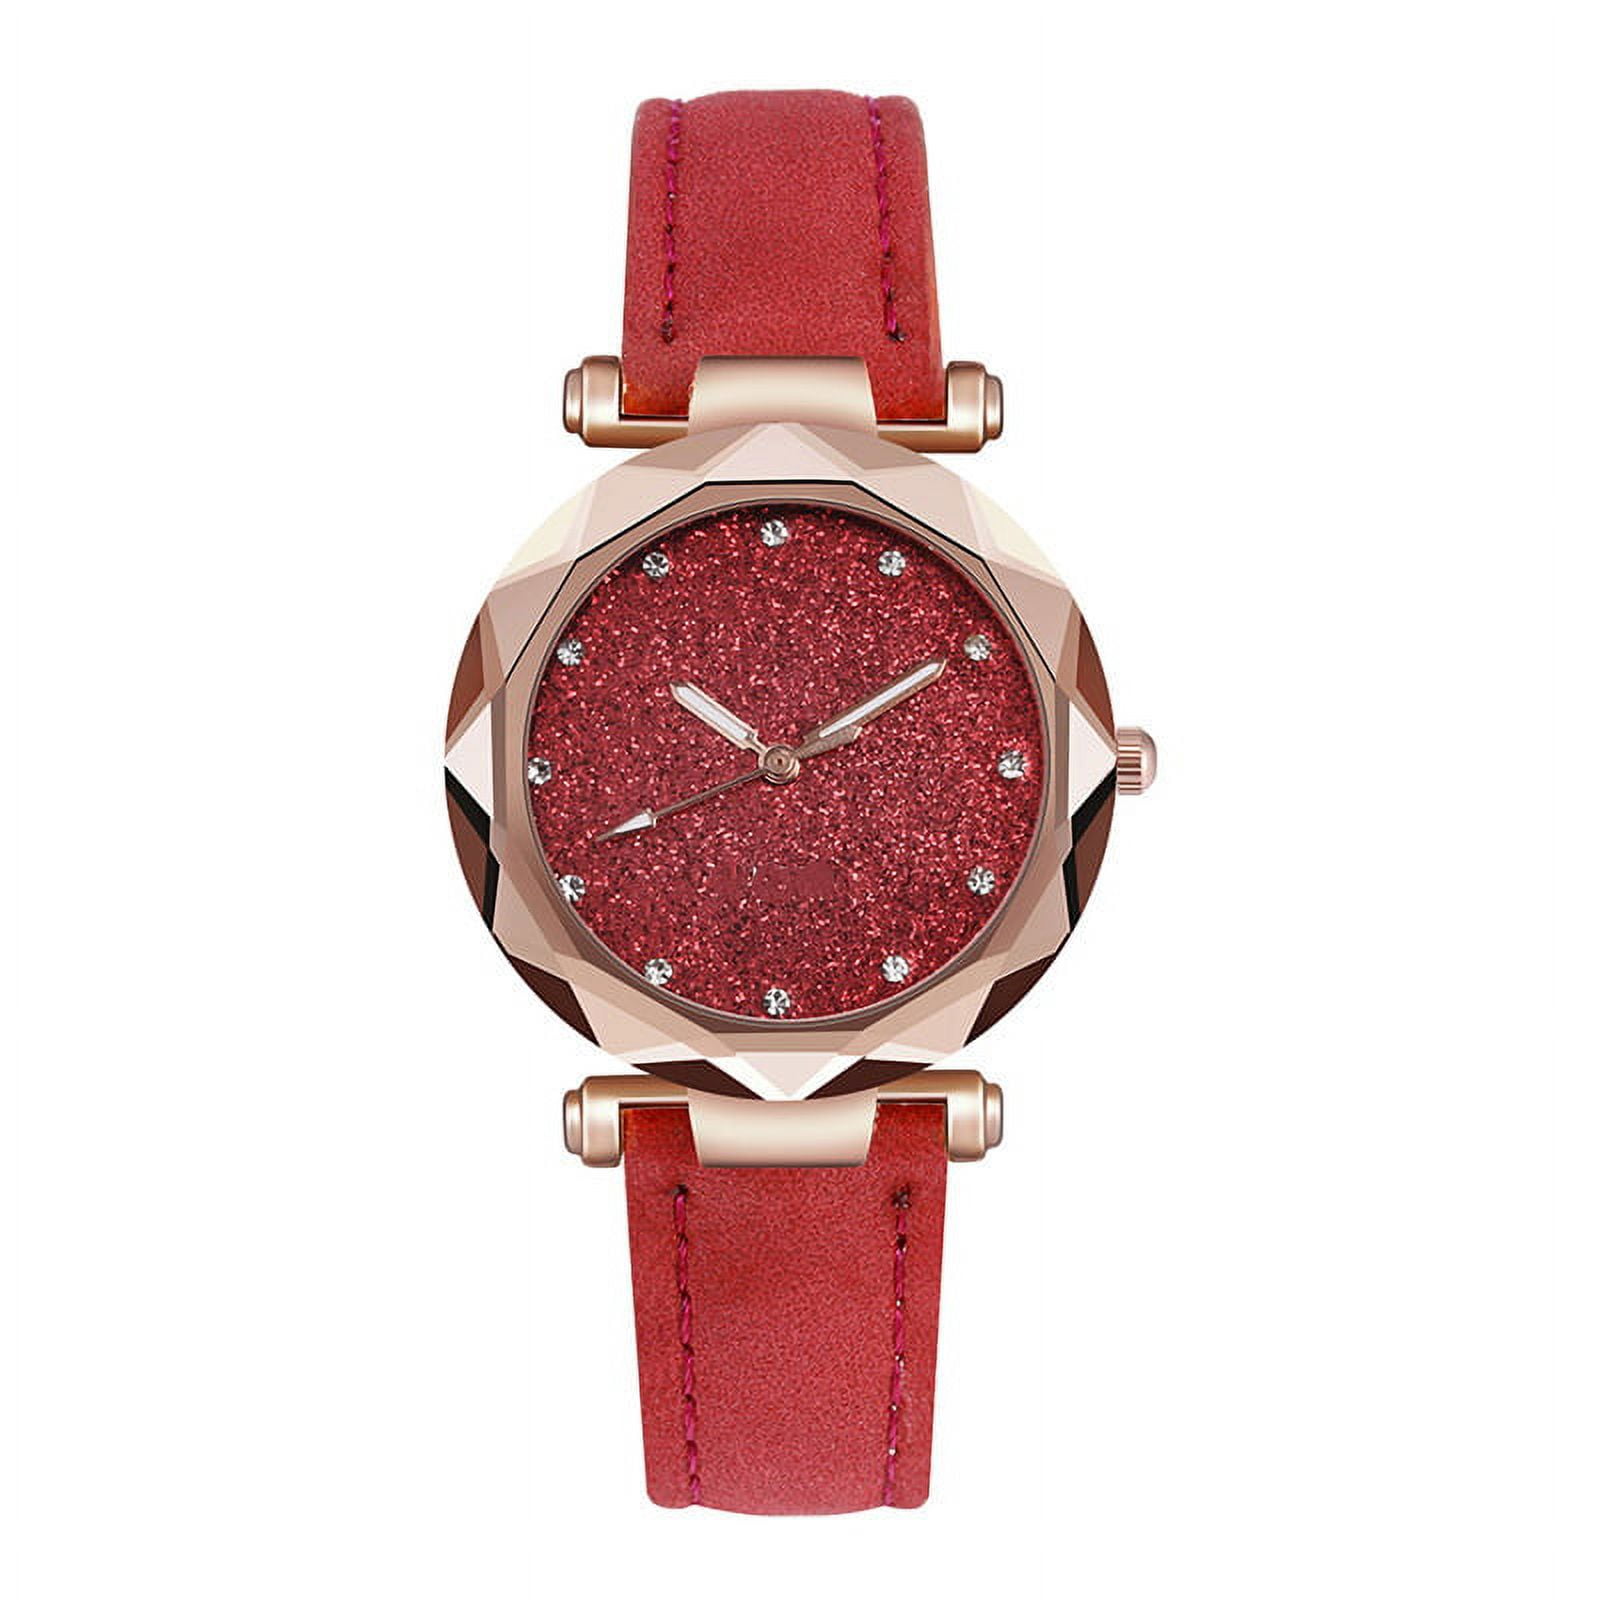 Watches for Women,Women's Square Silica Gel Band Watch,Girl Bracelet Watches  Quartz Mesh Belt Dial Wristwatches with Leather Strap ,Gift for Wife, Daughter,Sister - Walmart.com